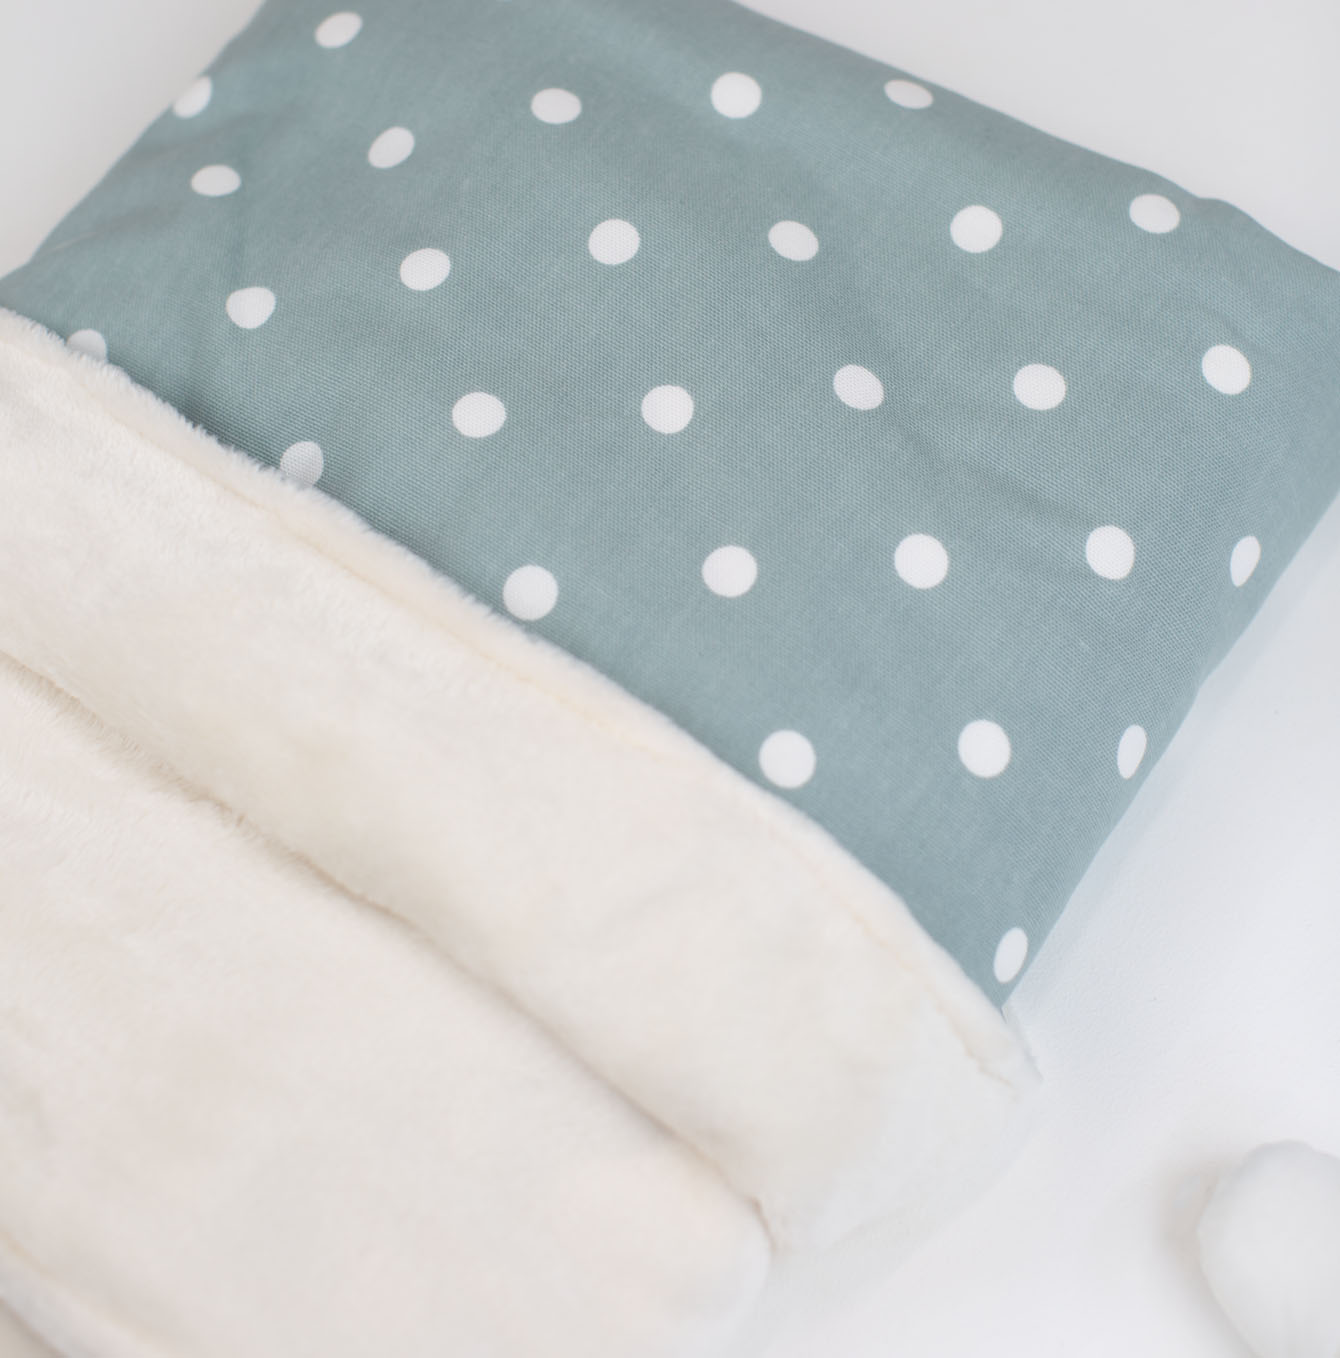  Super Soft Sherpa & Teddy Fleece Lining, Our Luxury Cat & Kitten Blanket In Stunning Duck Egg Spot I The Perfect Cat Bed Accessory! Available Now at Lords & Labradors